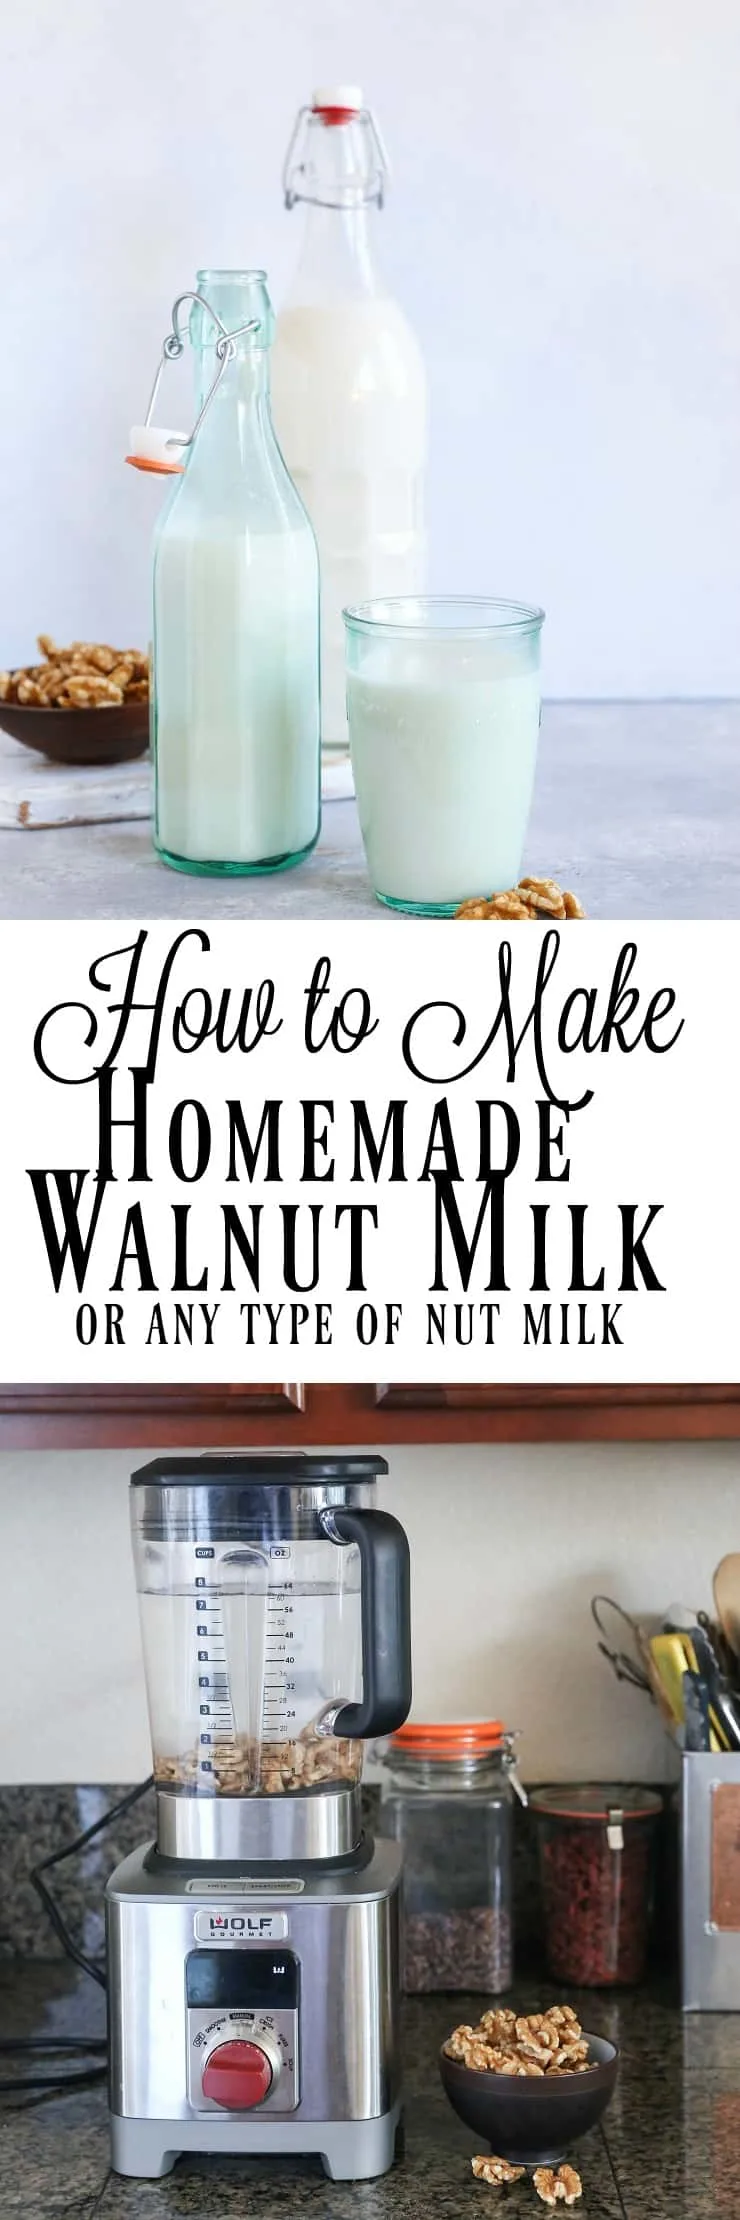 How to Make Walnut Milk (or any other type of nut milk) at home. An easy tutorial with photos